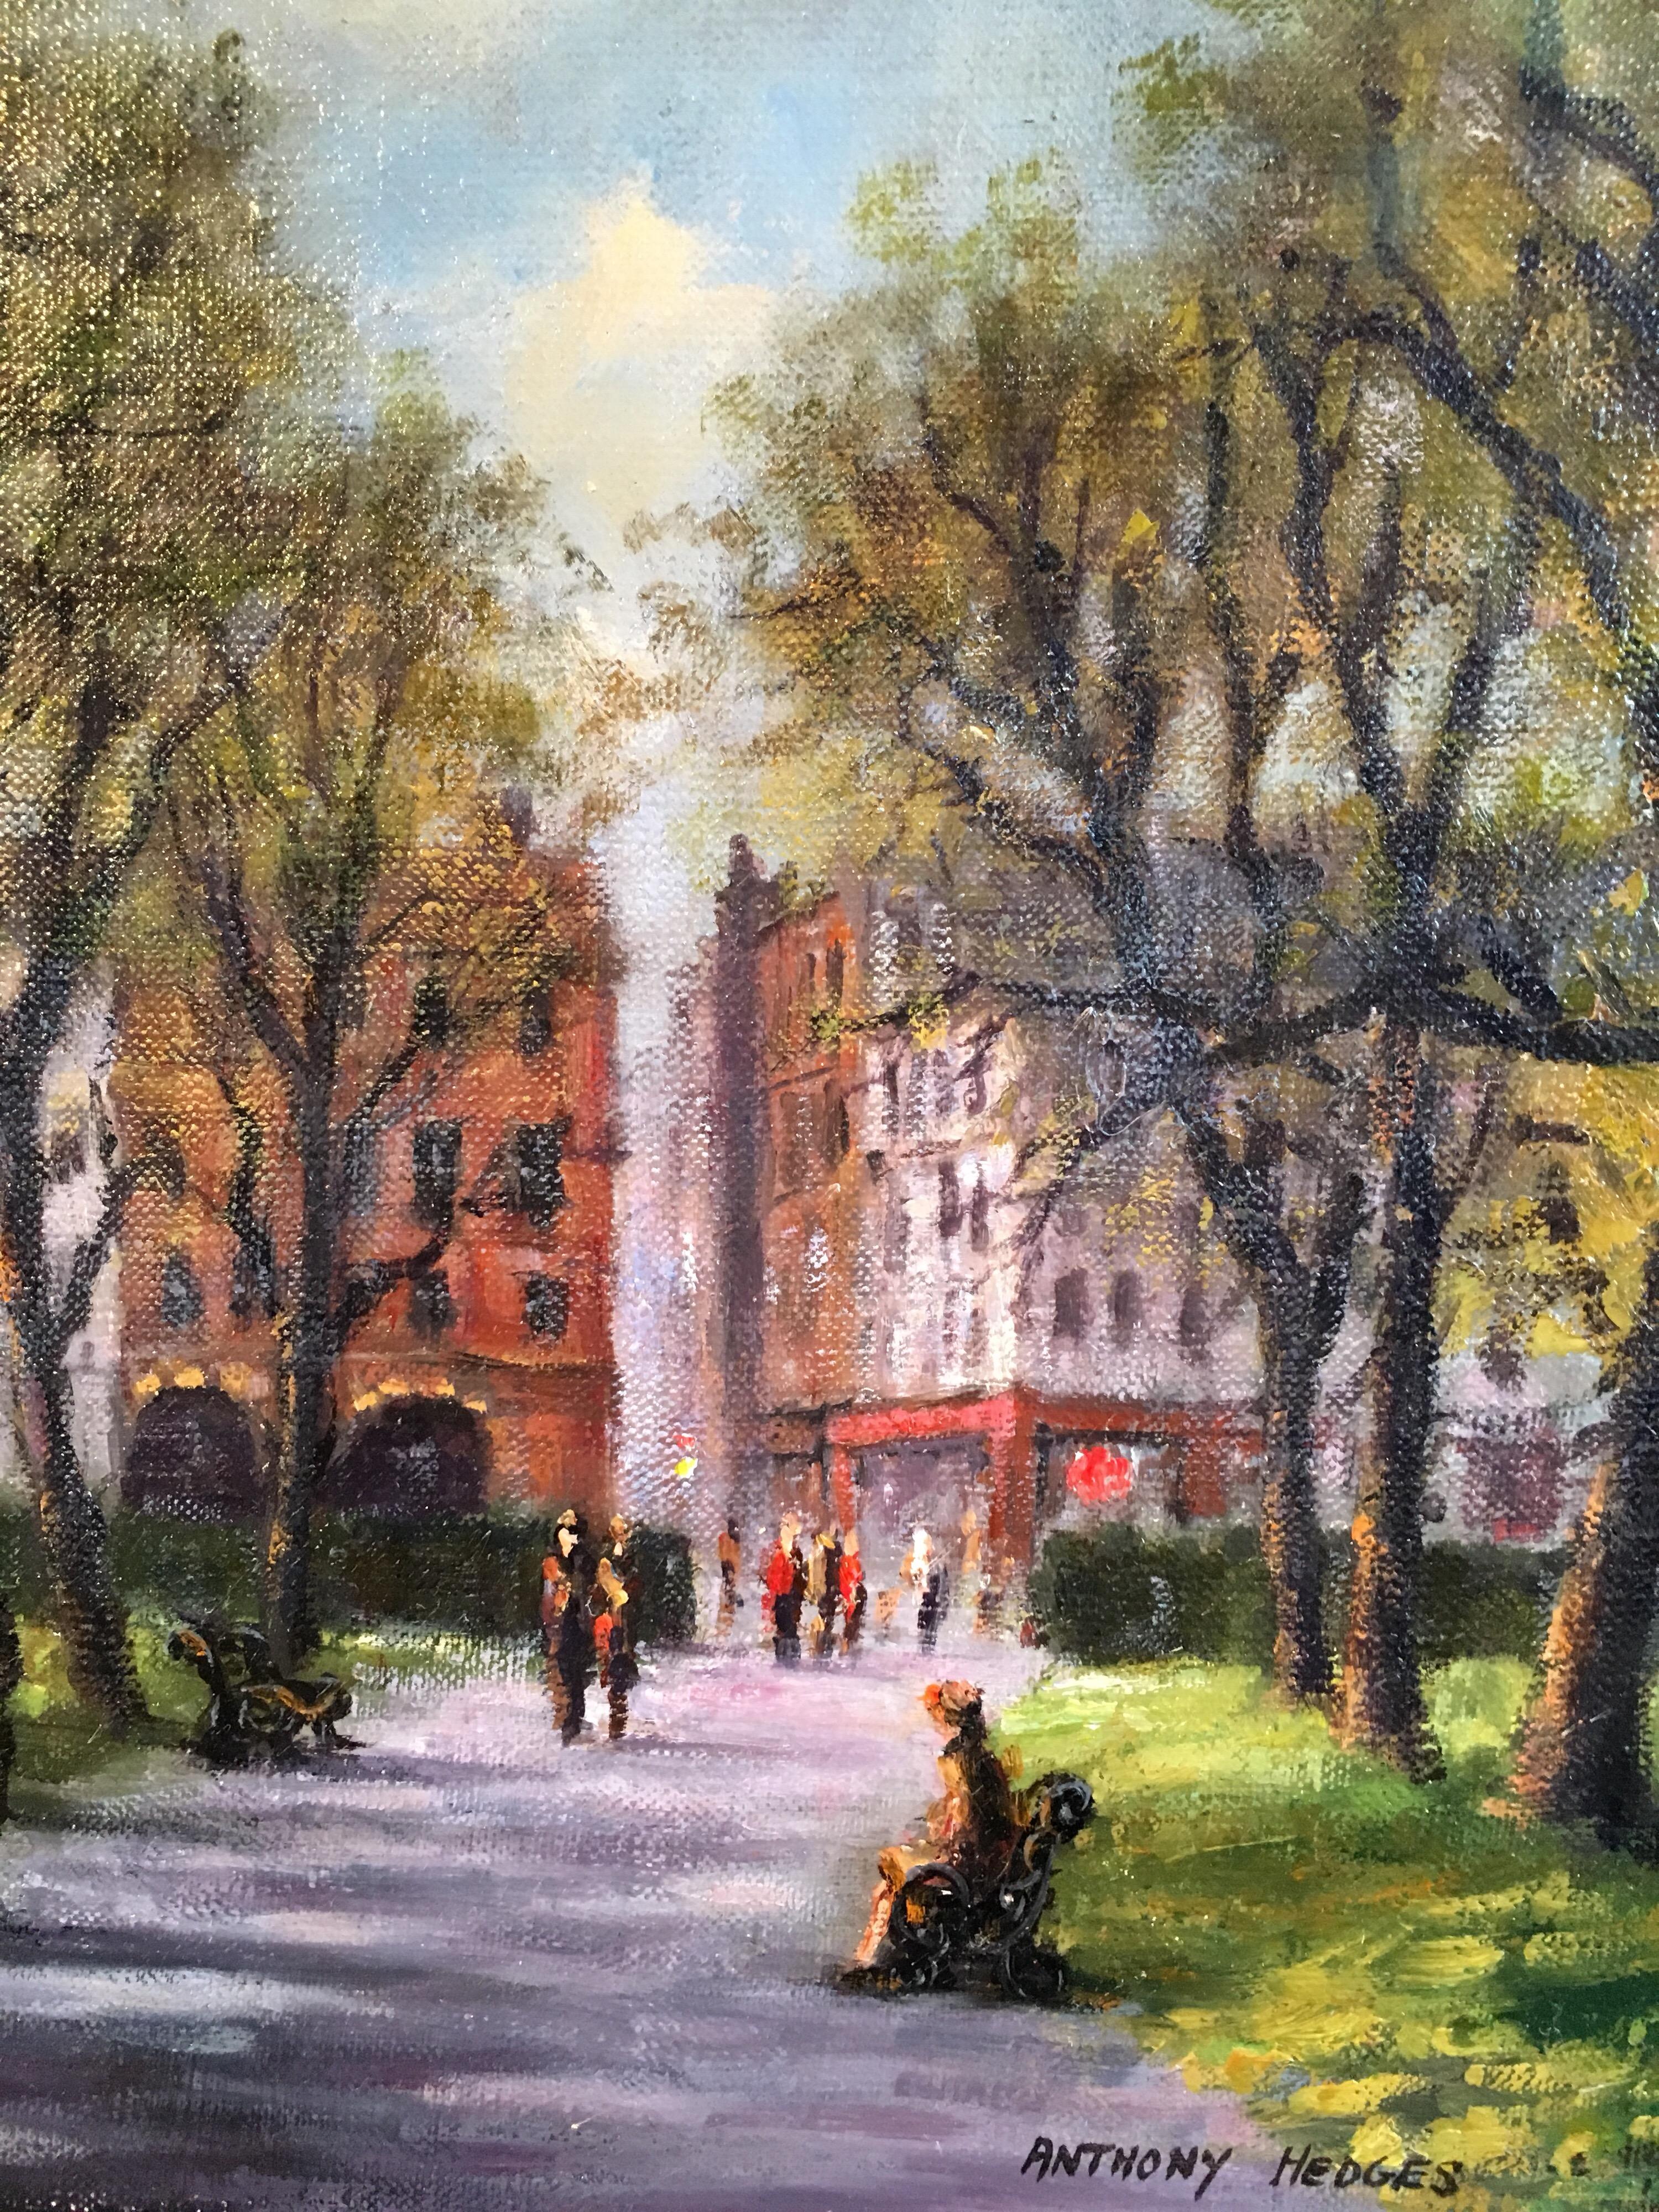 Park Walk, Impressionist City Scene, Signed Oil Painting
By British artist, Anthony Hedges, 20th Century
Signed by the artist on the lower right hand corner
Oil painting on canvas, unframed
Canvas size: 12 x 16 inches

Beautiful scene of a city